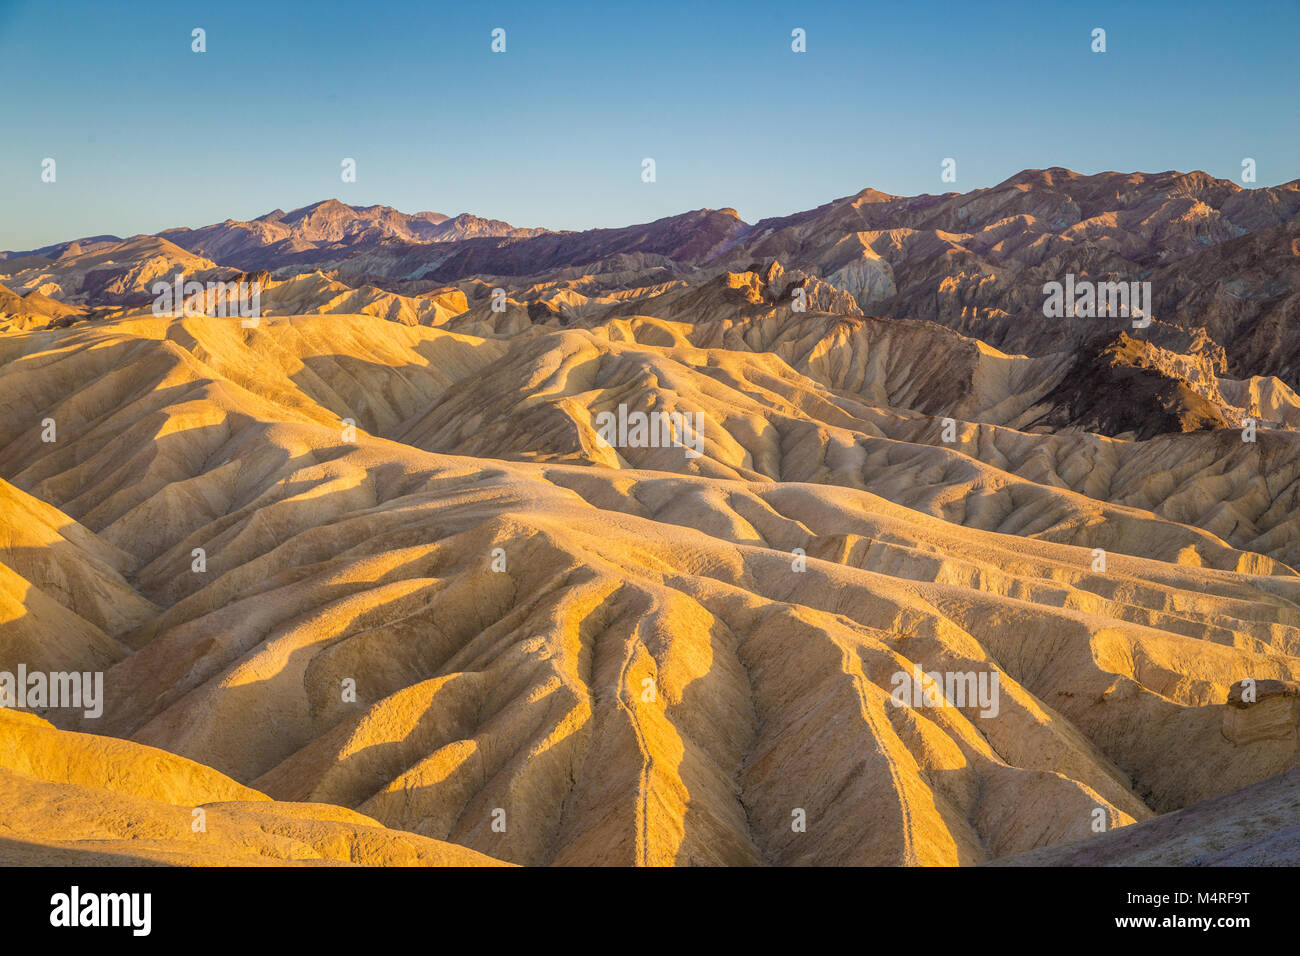 Scenic view of amazing sandstone formations at famous Zabriskie Point viewpoint in golden evening light at sunset, Death Valley National Park, USA Stock Photo